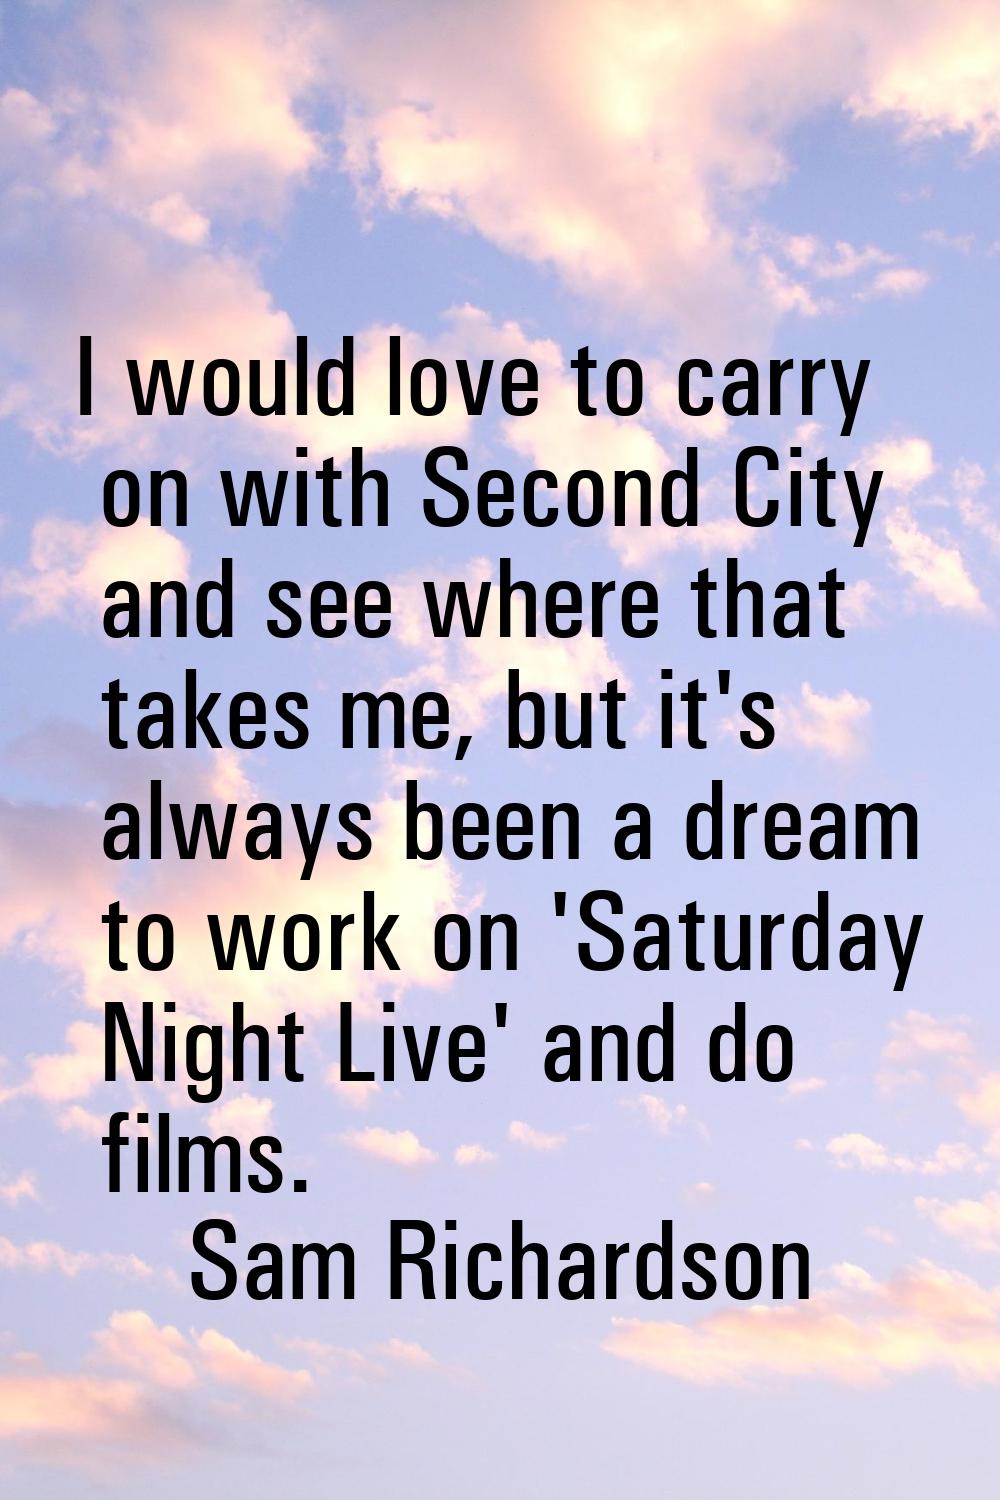 I would love to carry on with Second City and see where that takes me, but it's always been a dream